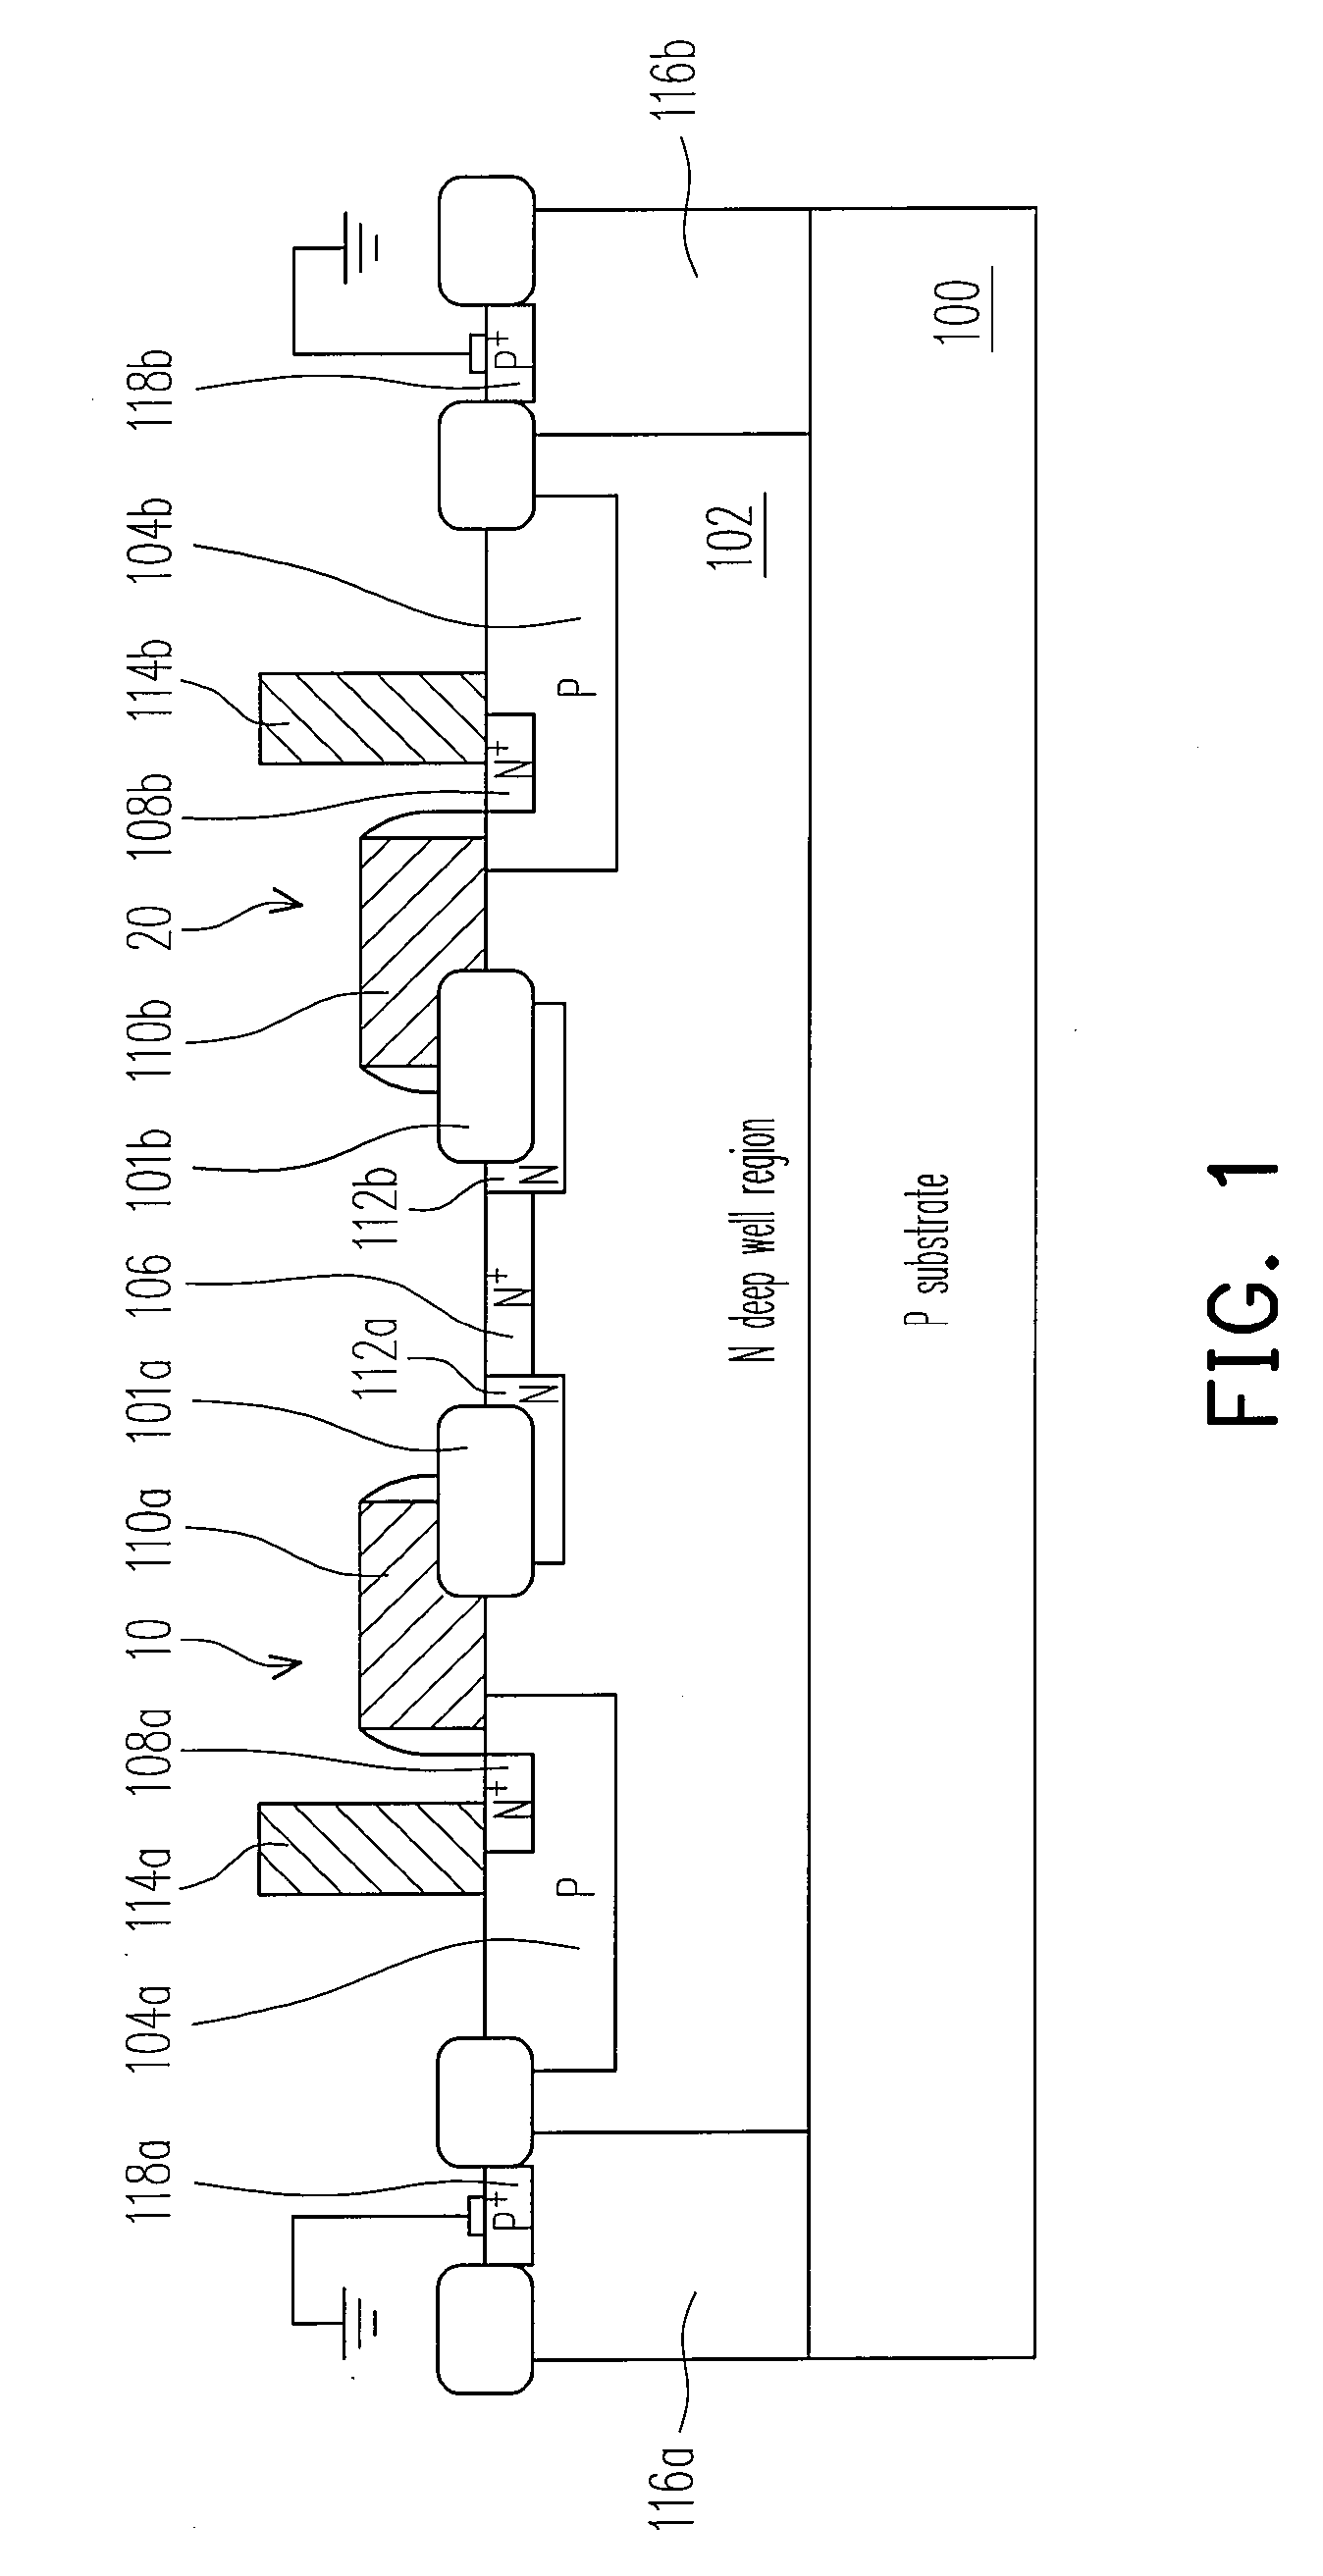 Ldmos device for ESD protection circuit